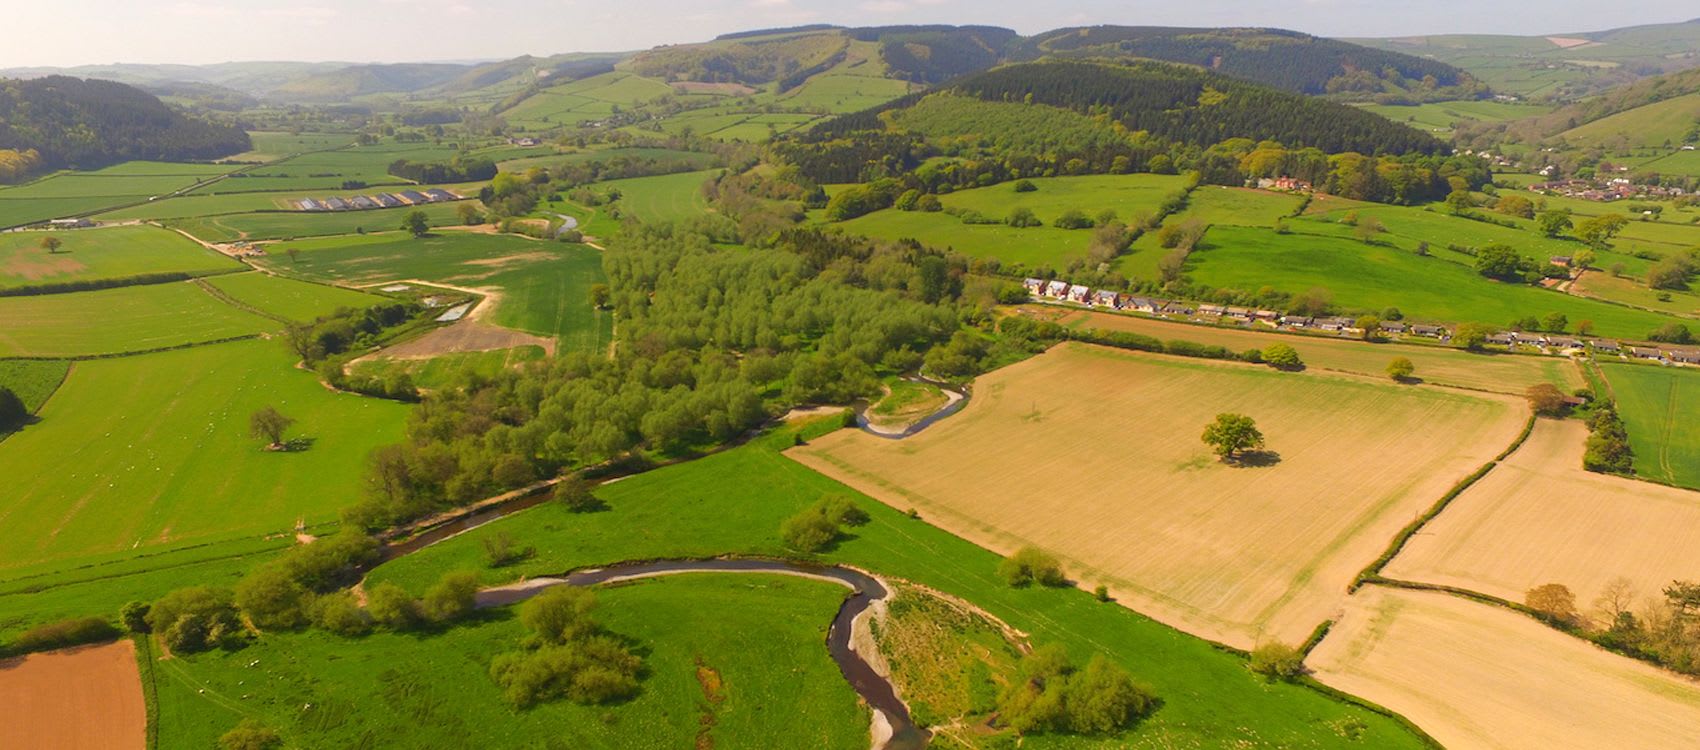 The Wye Ithon Severn Ecosystems (WISE) Project